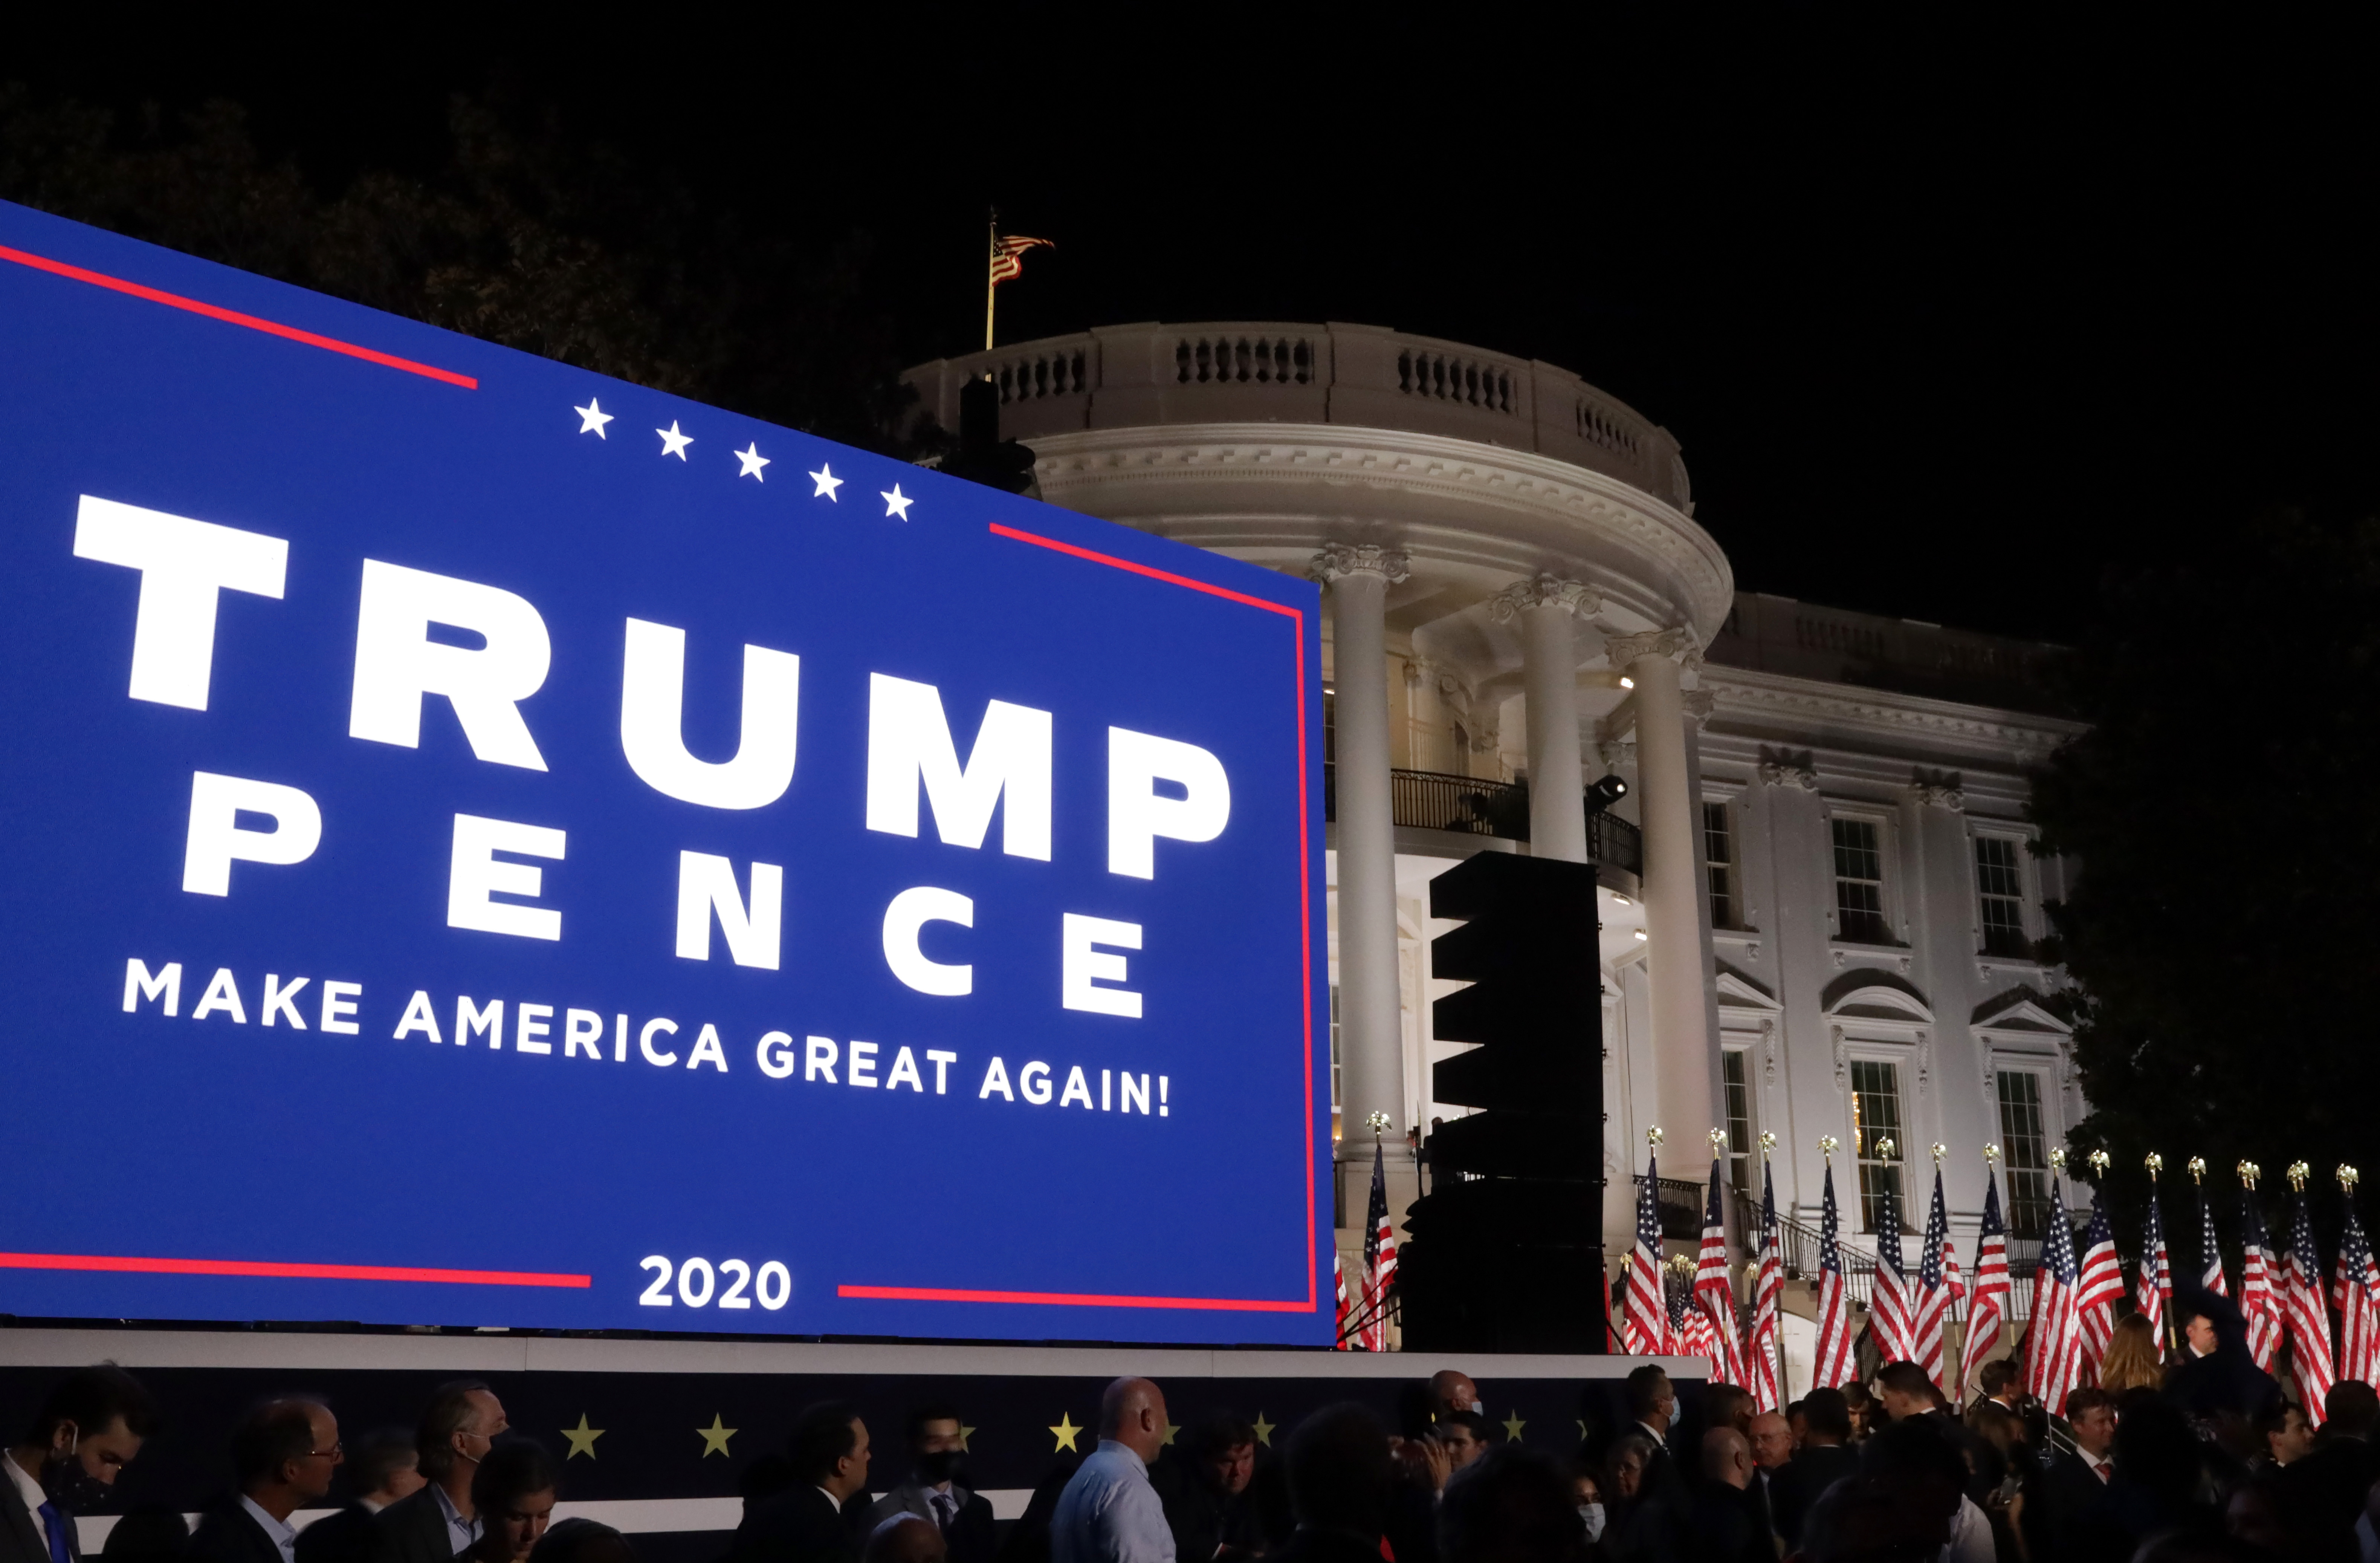 A screen displays the campaign banner for U.S. President Trump and Vice President Mike Pence following Trump’s acceptance speech for the Republican presidential nomination on the South Lawn of the White House August 27, 2020 in Washington, DC.